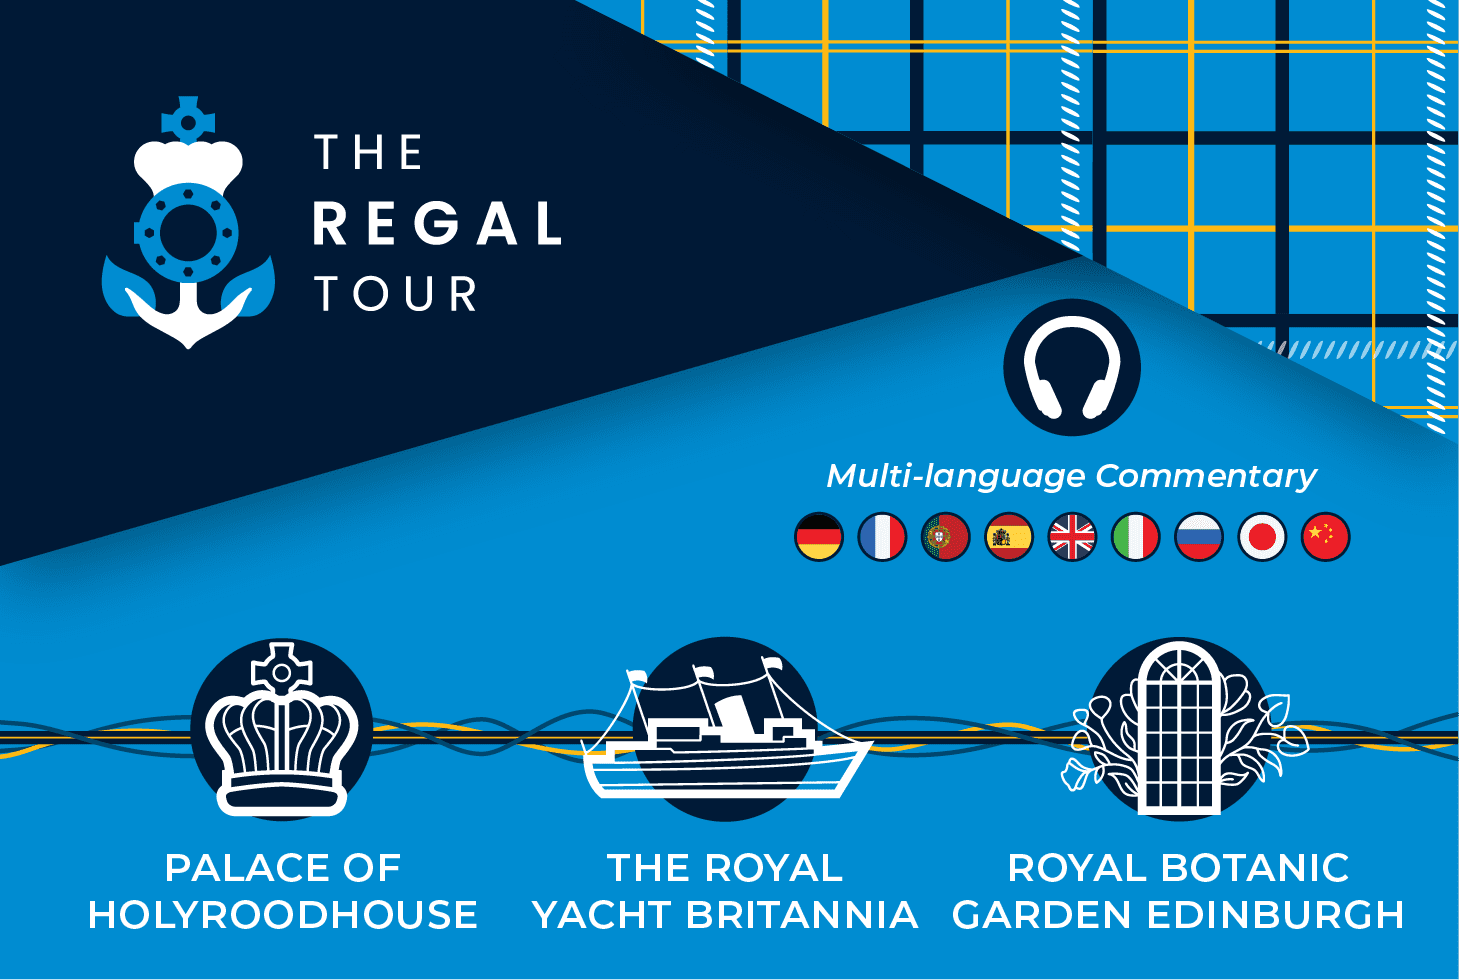 The Regal Tour. Multi-language Commentary. The tour includes the Palace of Holyroodhouse, the Royal Yacht Britannia and the Royal Botanic Garden Edinburgh.